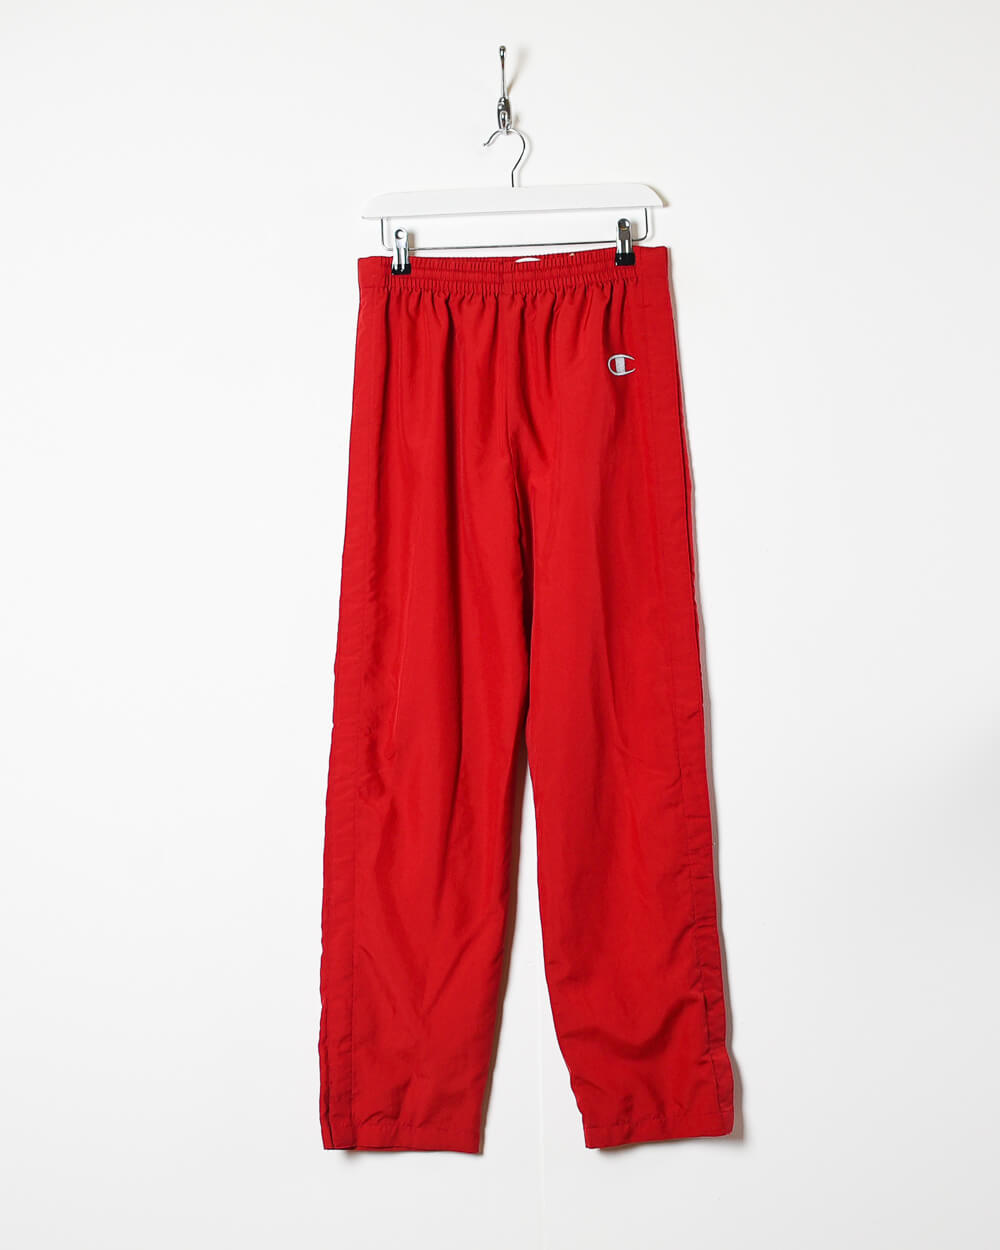 Red Champion Tracksuit Bottoms - Small